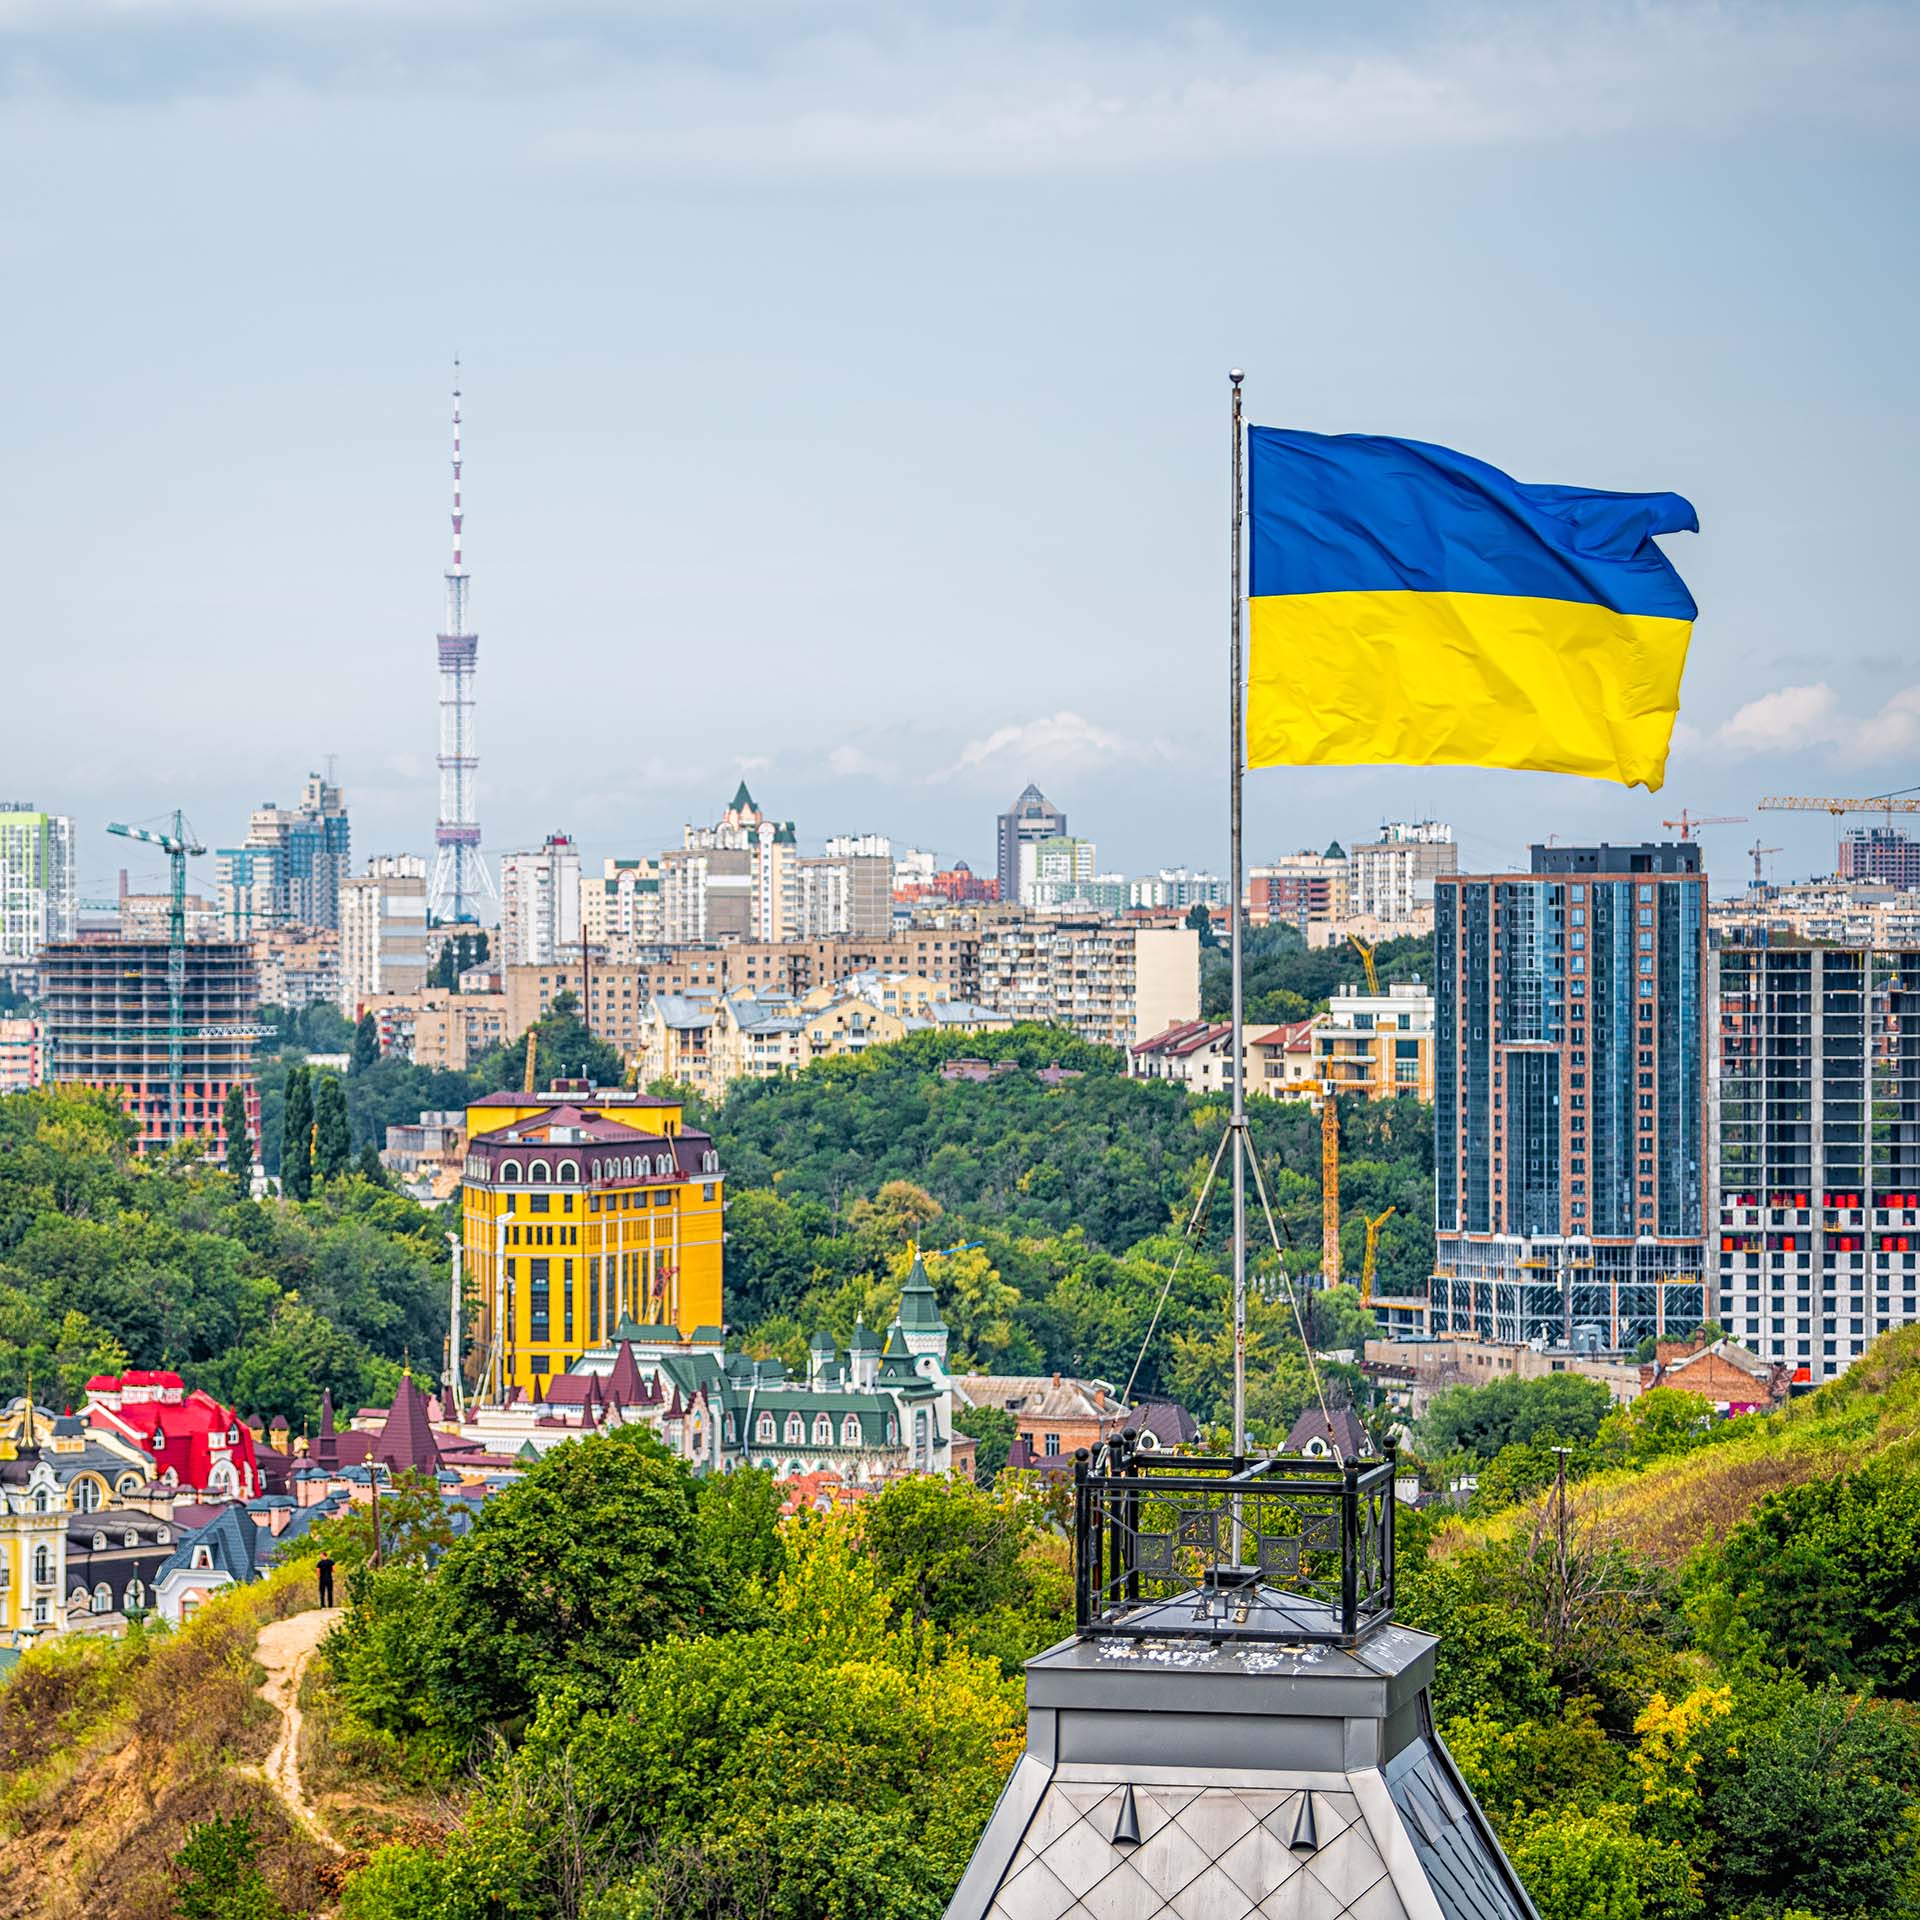 Hazy skyline of buildings in Kyiv, Ukraine. A blue-and-yellow Ukrainian flag flies in the foreground.